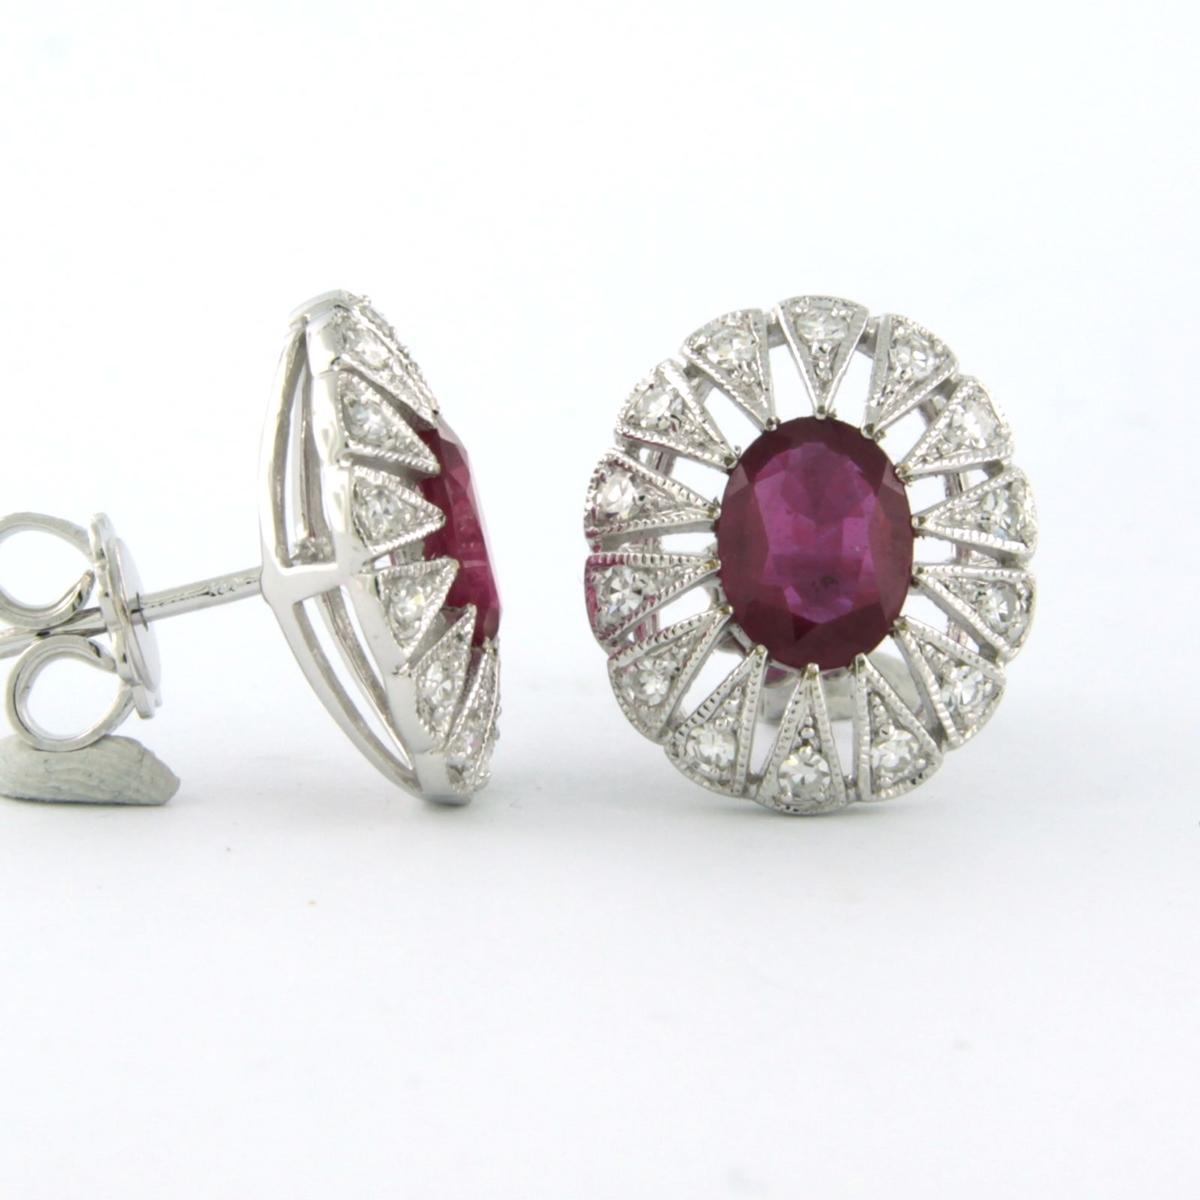 Single Cut 14 kt gold earrings set with ruby 2.90 carat and single cut diamond total 0.48ct For Sale